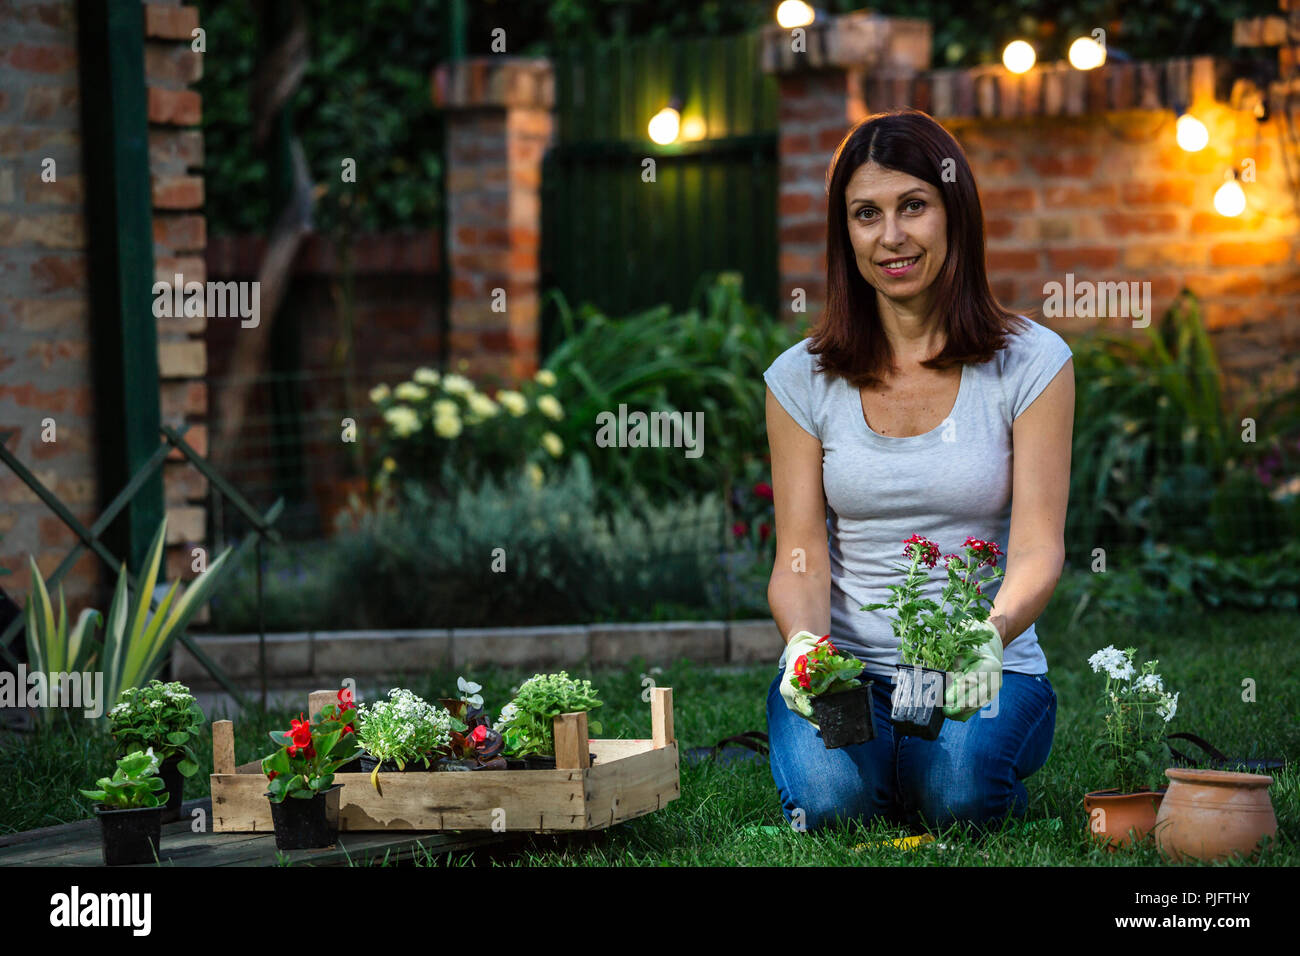 Mid-age woman planting flowers in backyard Stock Photo